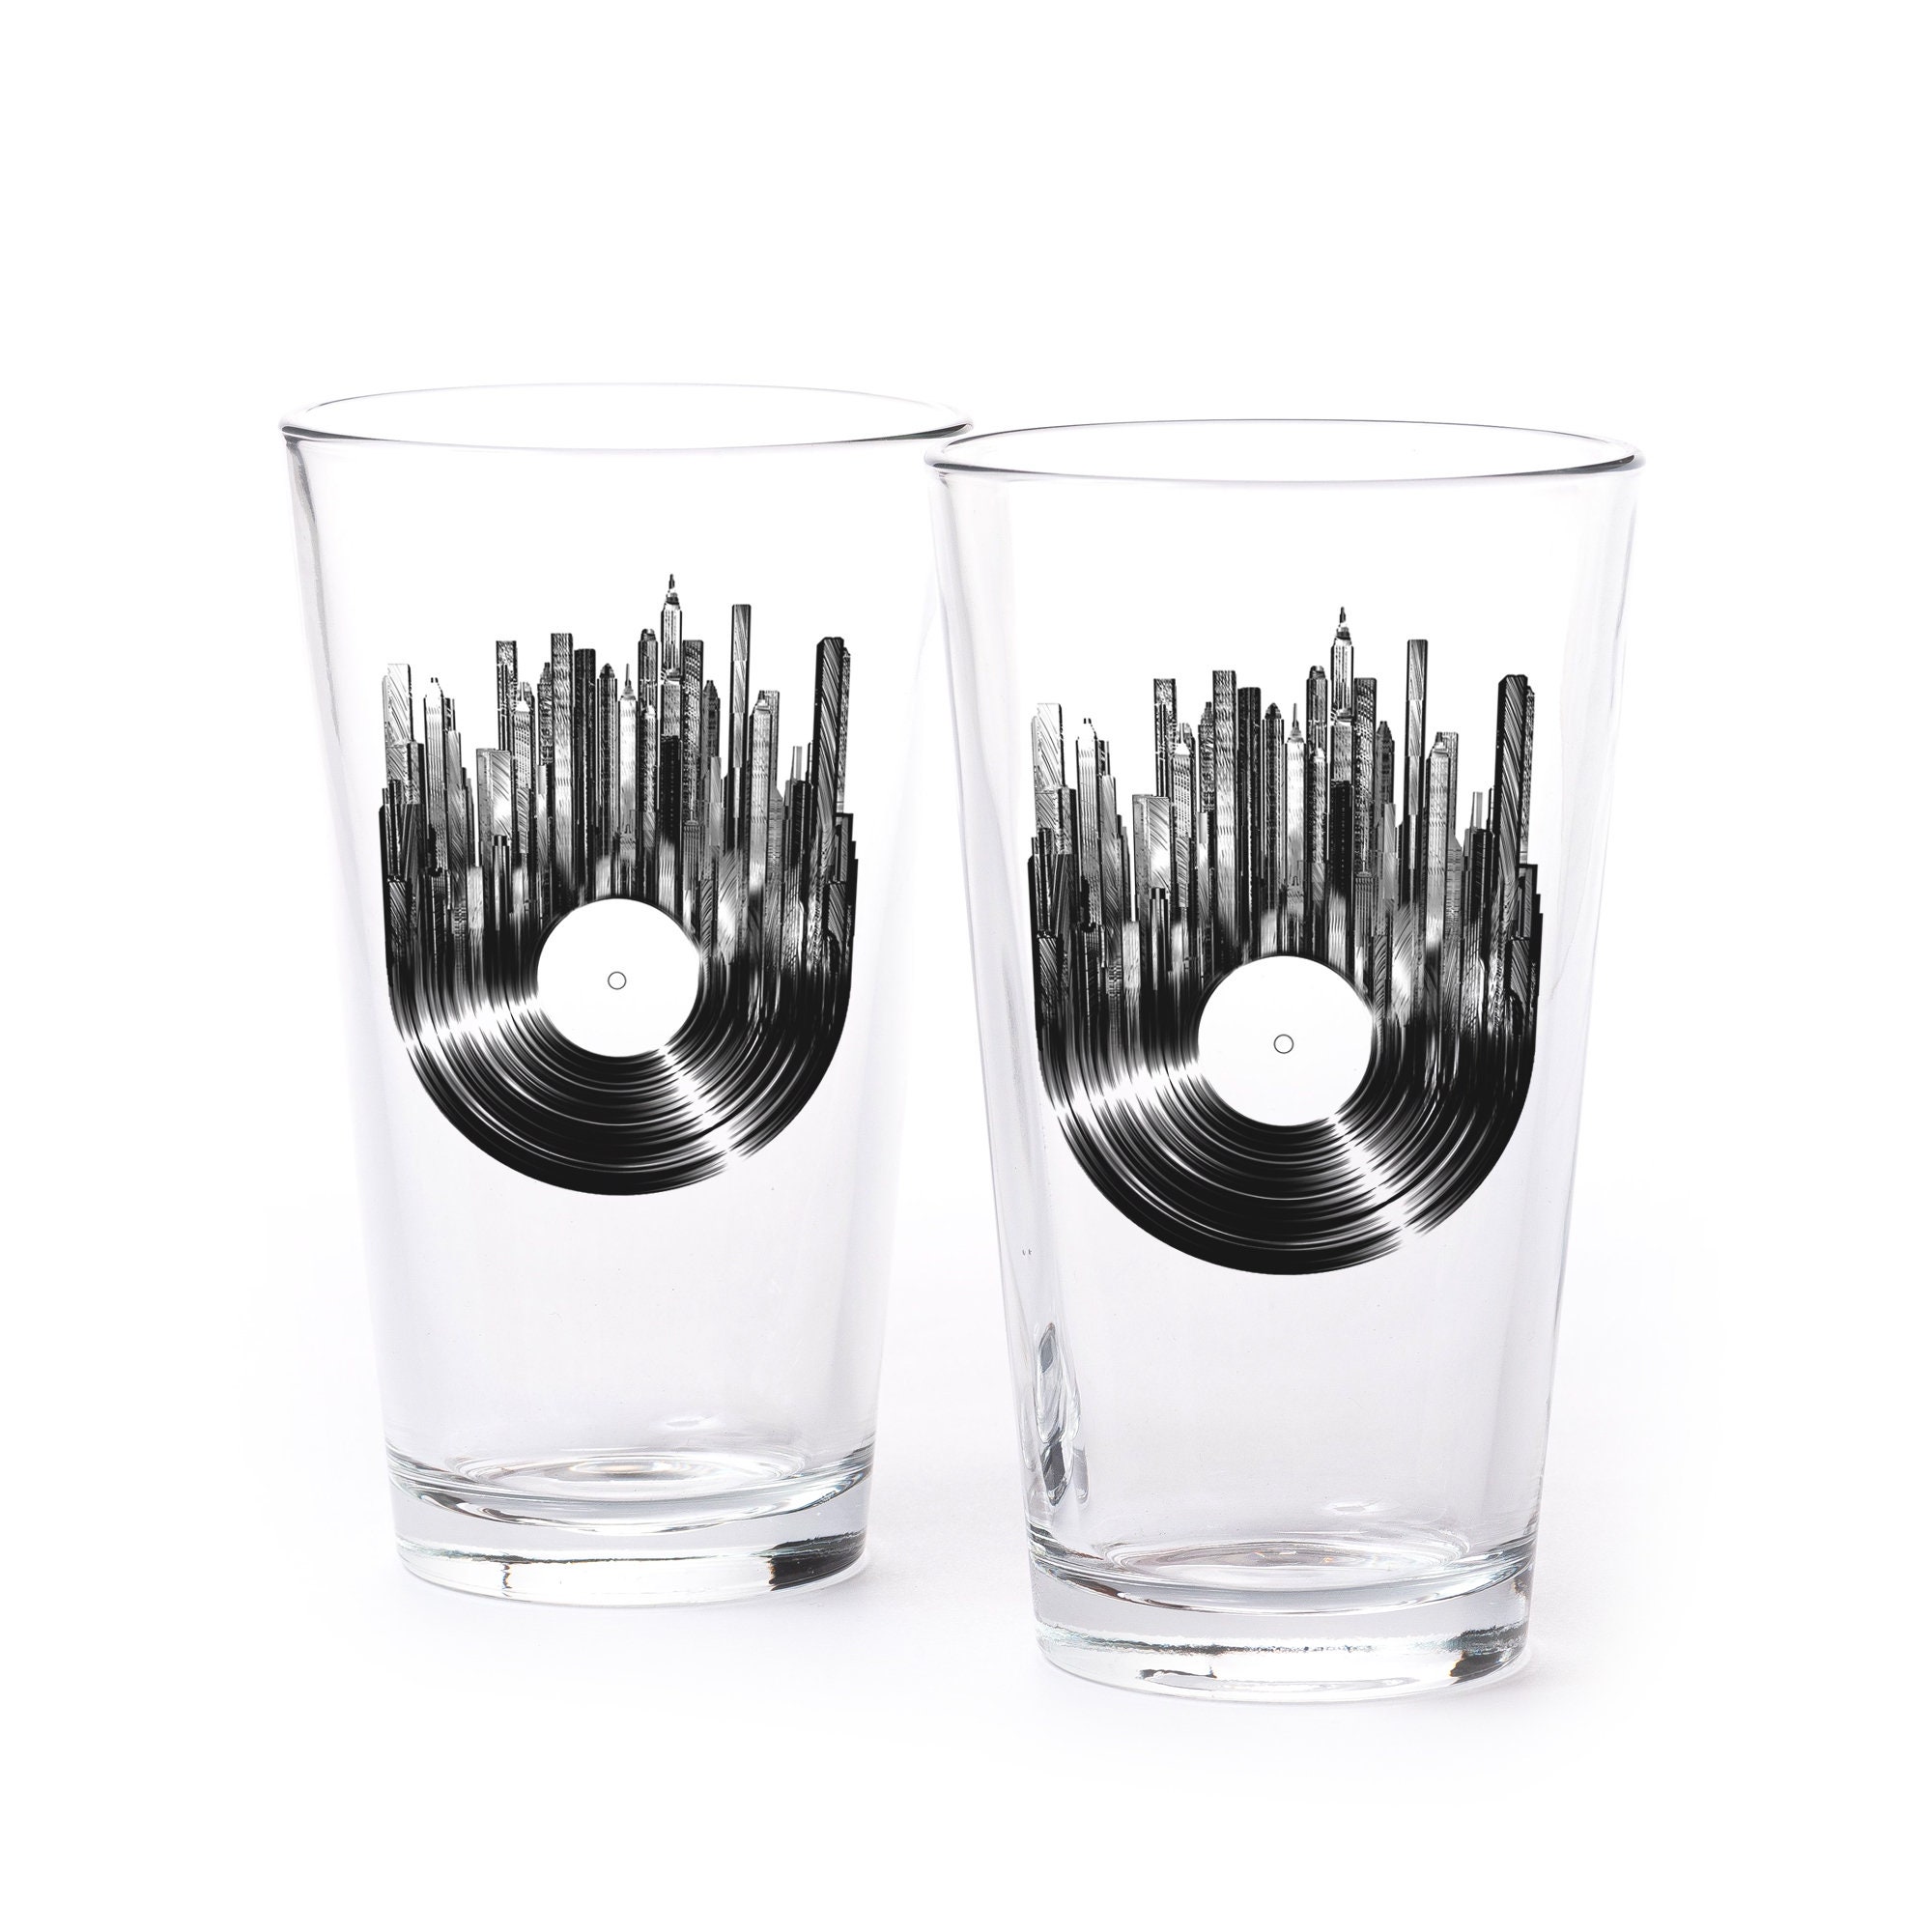 College Cityscape Rocks Glasses - Set of 2 - Morehouse College | Wine & Bar Storage | College Gifts | Wine Gifts | Gifts for Men